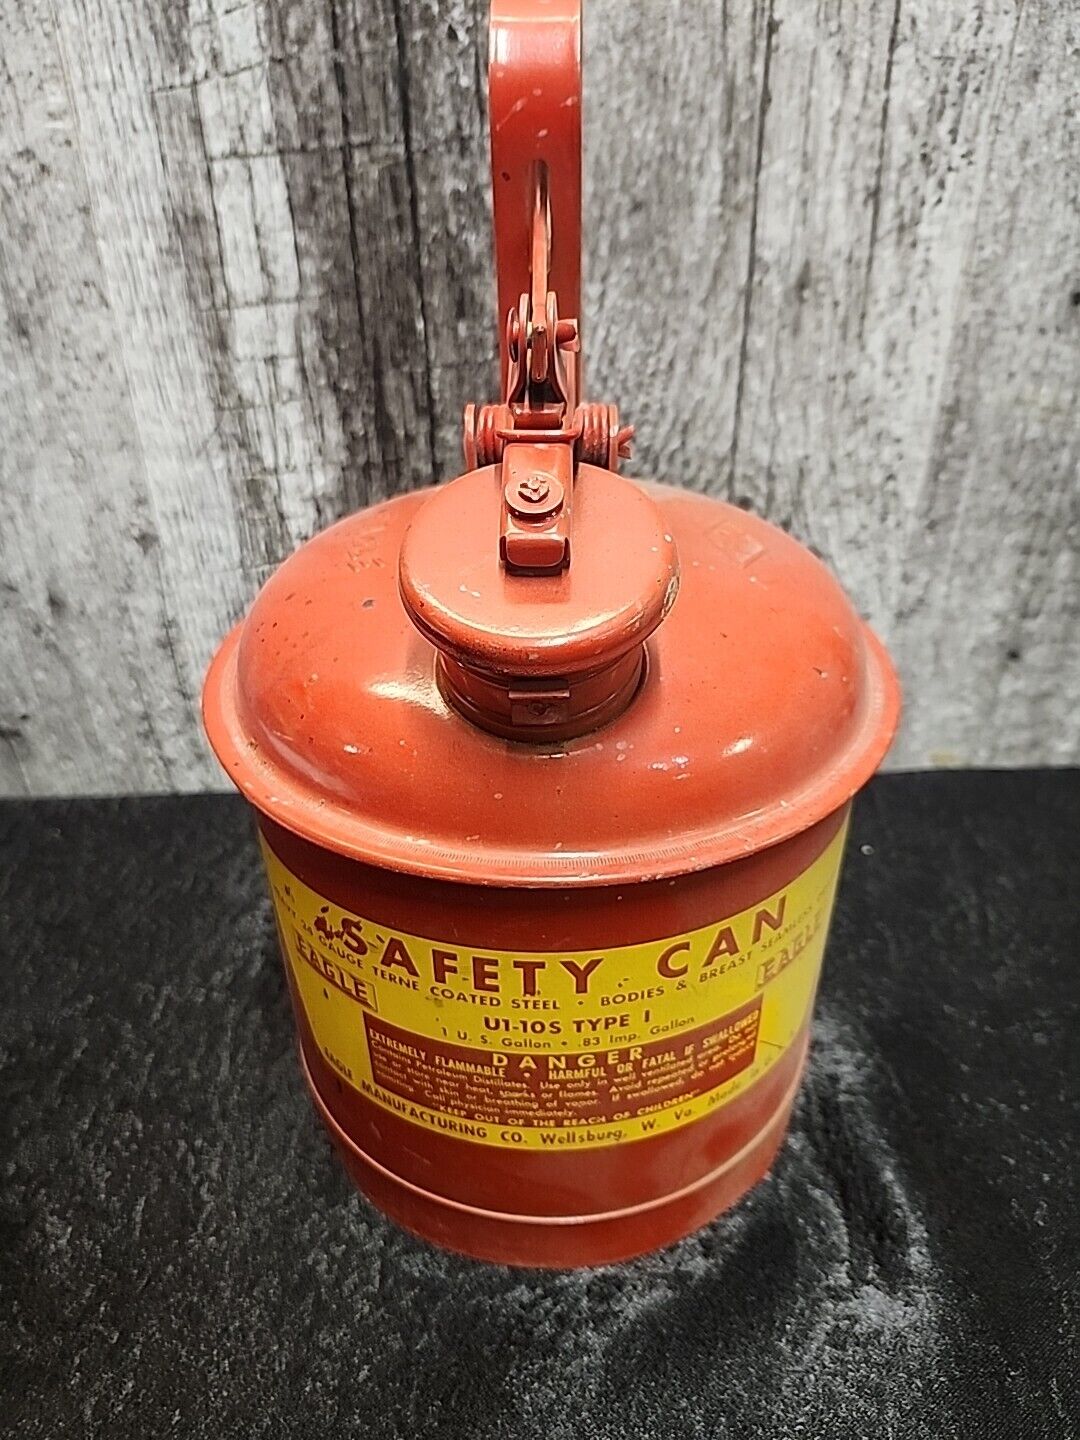 Vintage Eagle Safety Gas Can 1 GALLON, UI-10 S TYPE 1 Metal